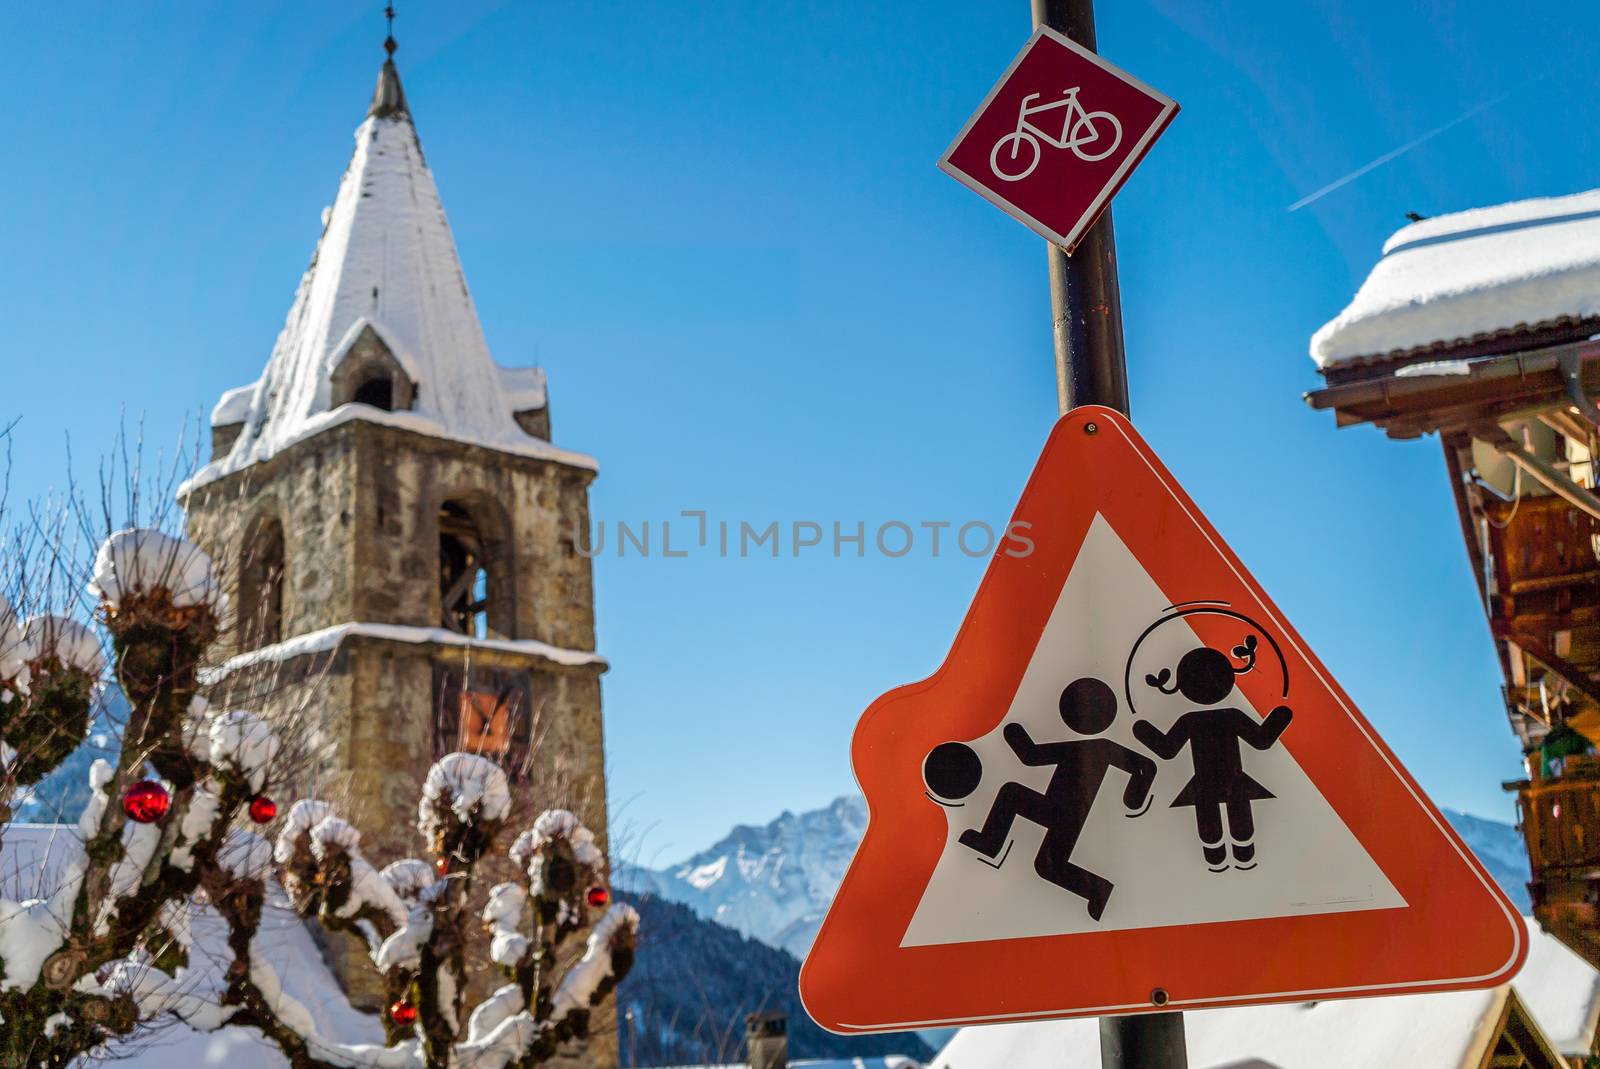 A boy and a girl playing on a roadsign close to a school, with a snow-covered church and mountains in the background.